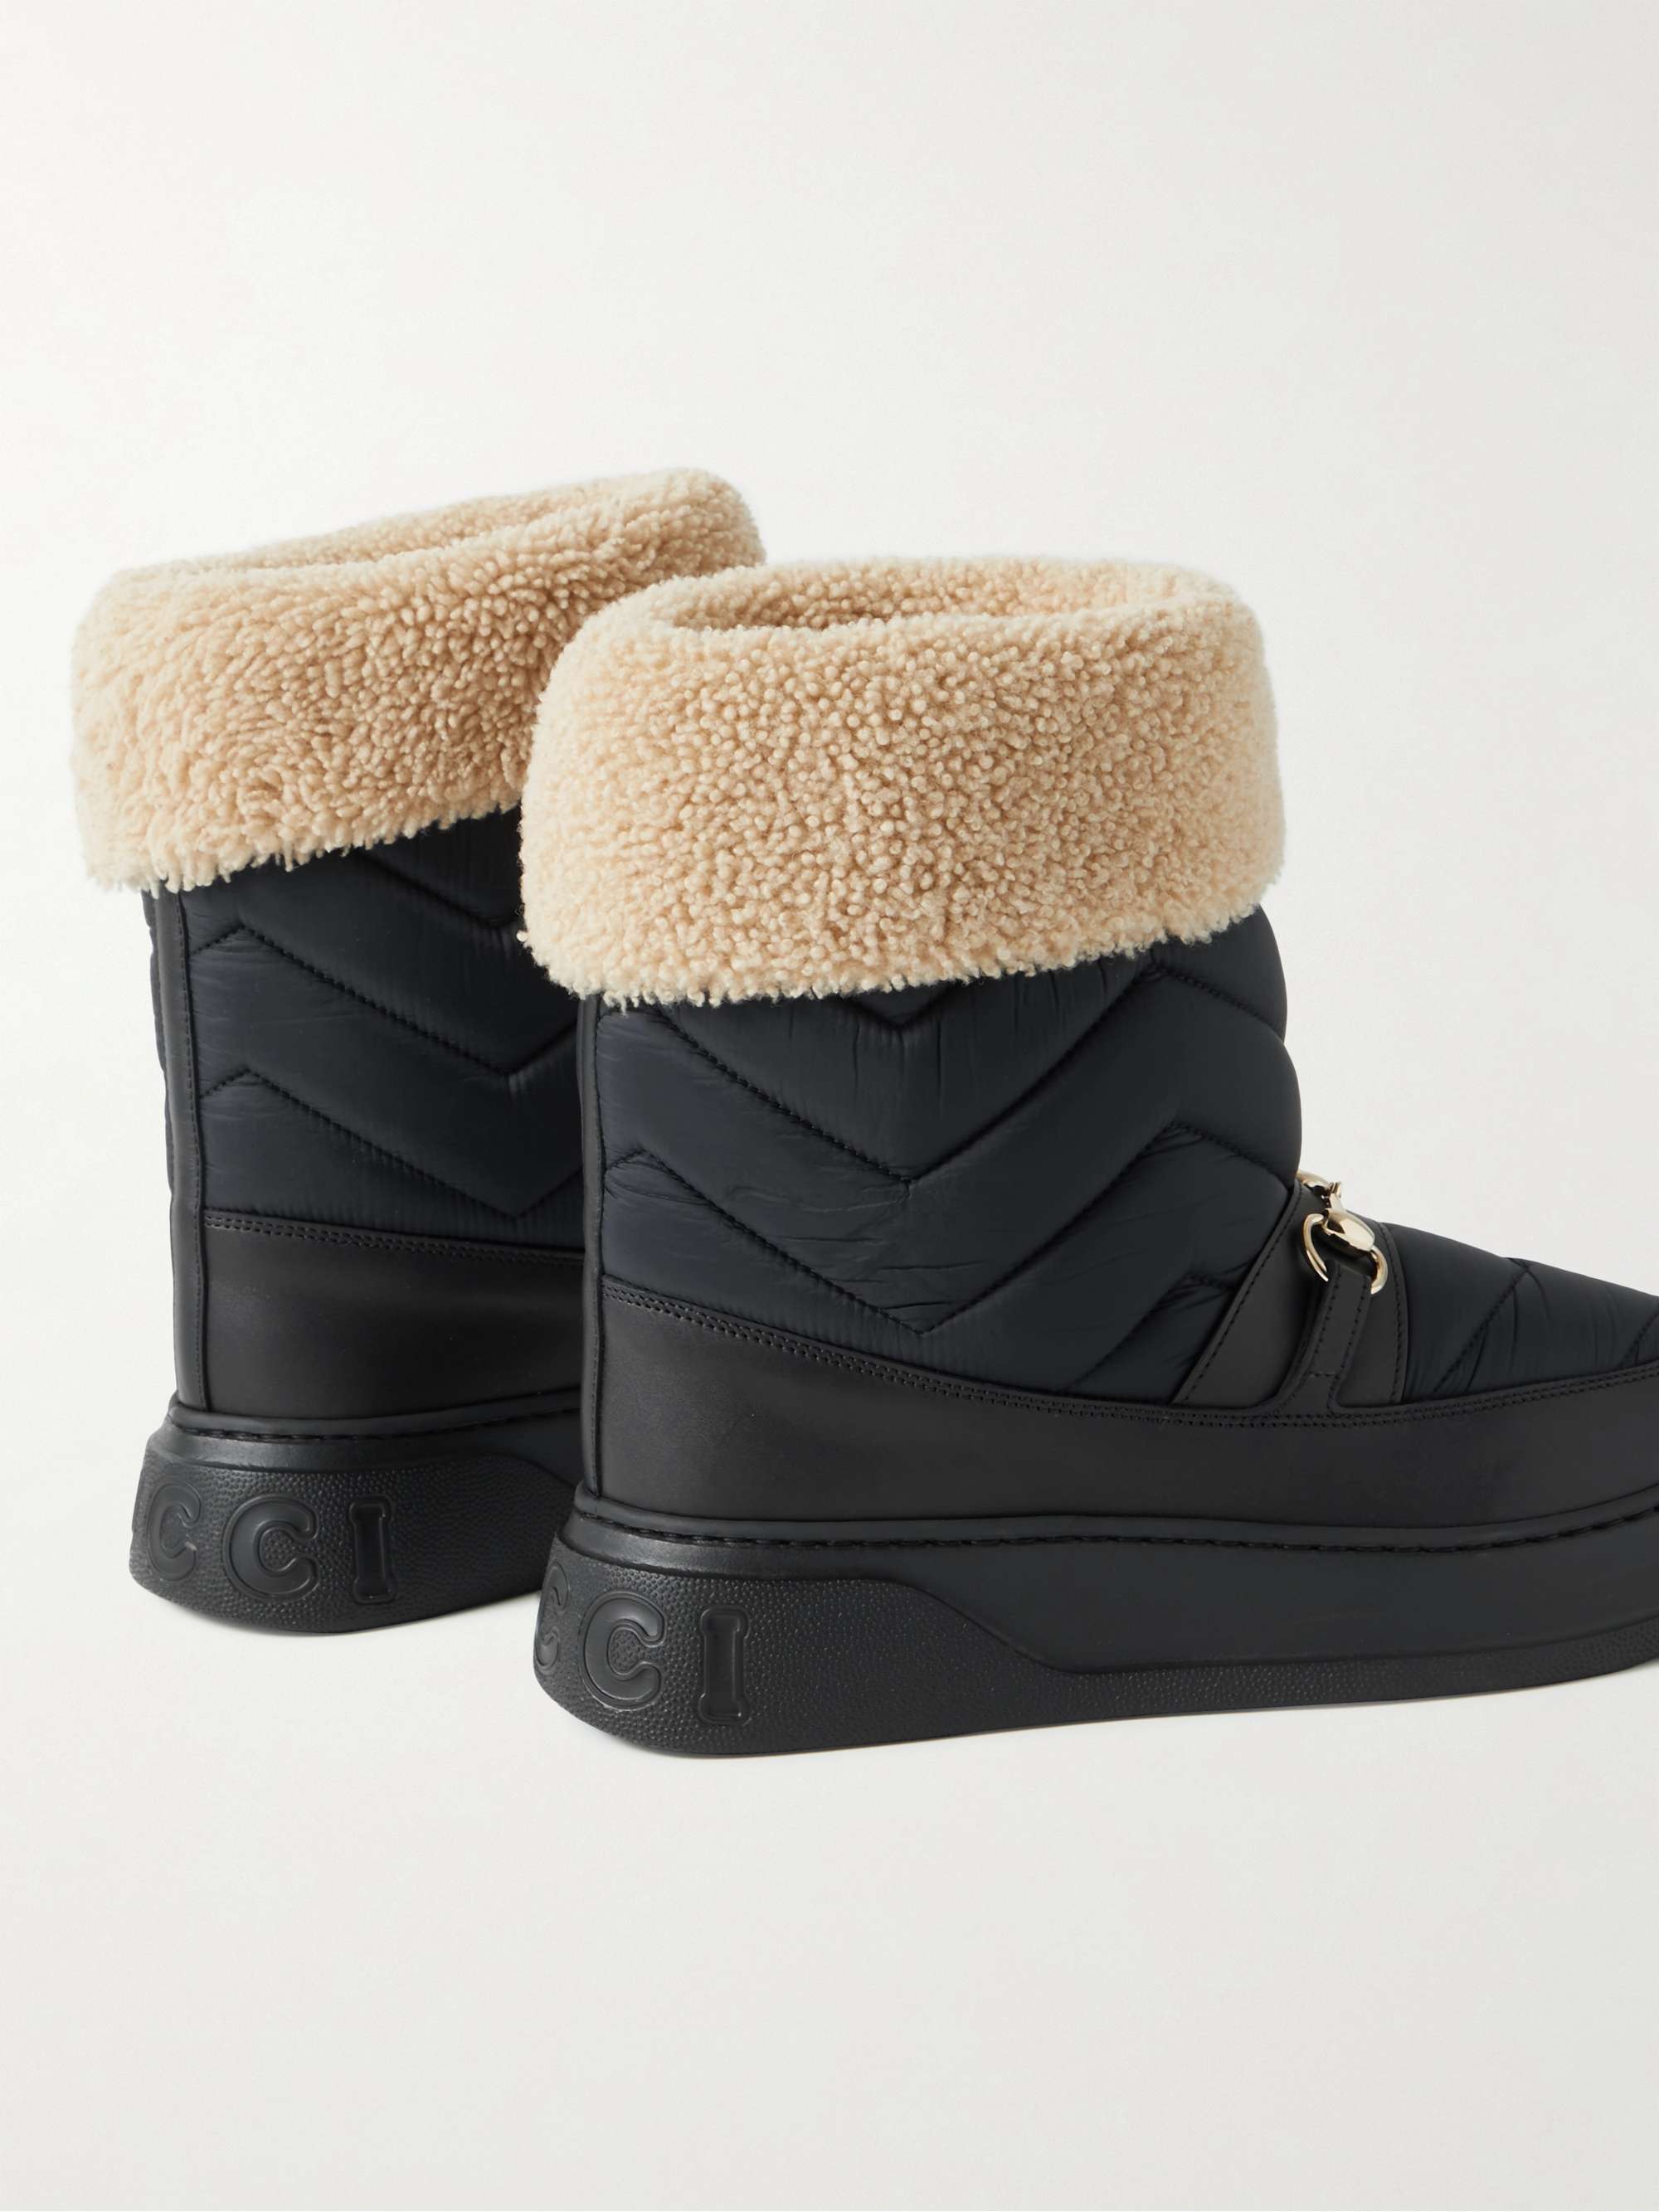 GUCCI Horsebit Shearling-Trimmed Quilted Nylon and Leather Boots